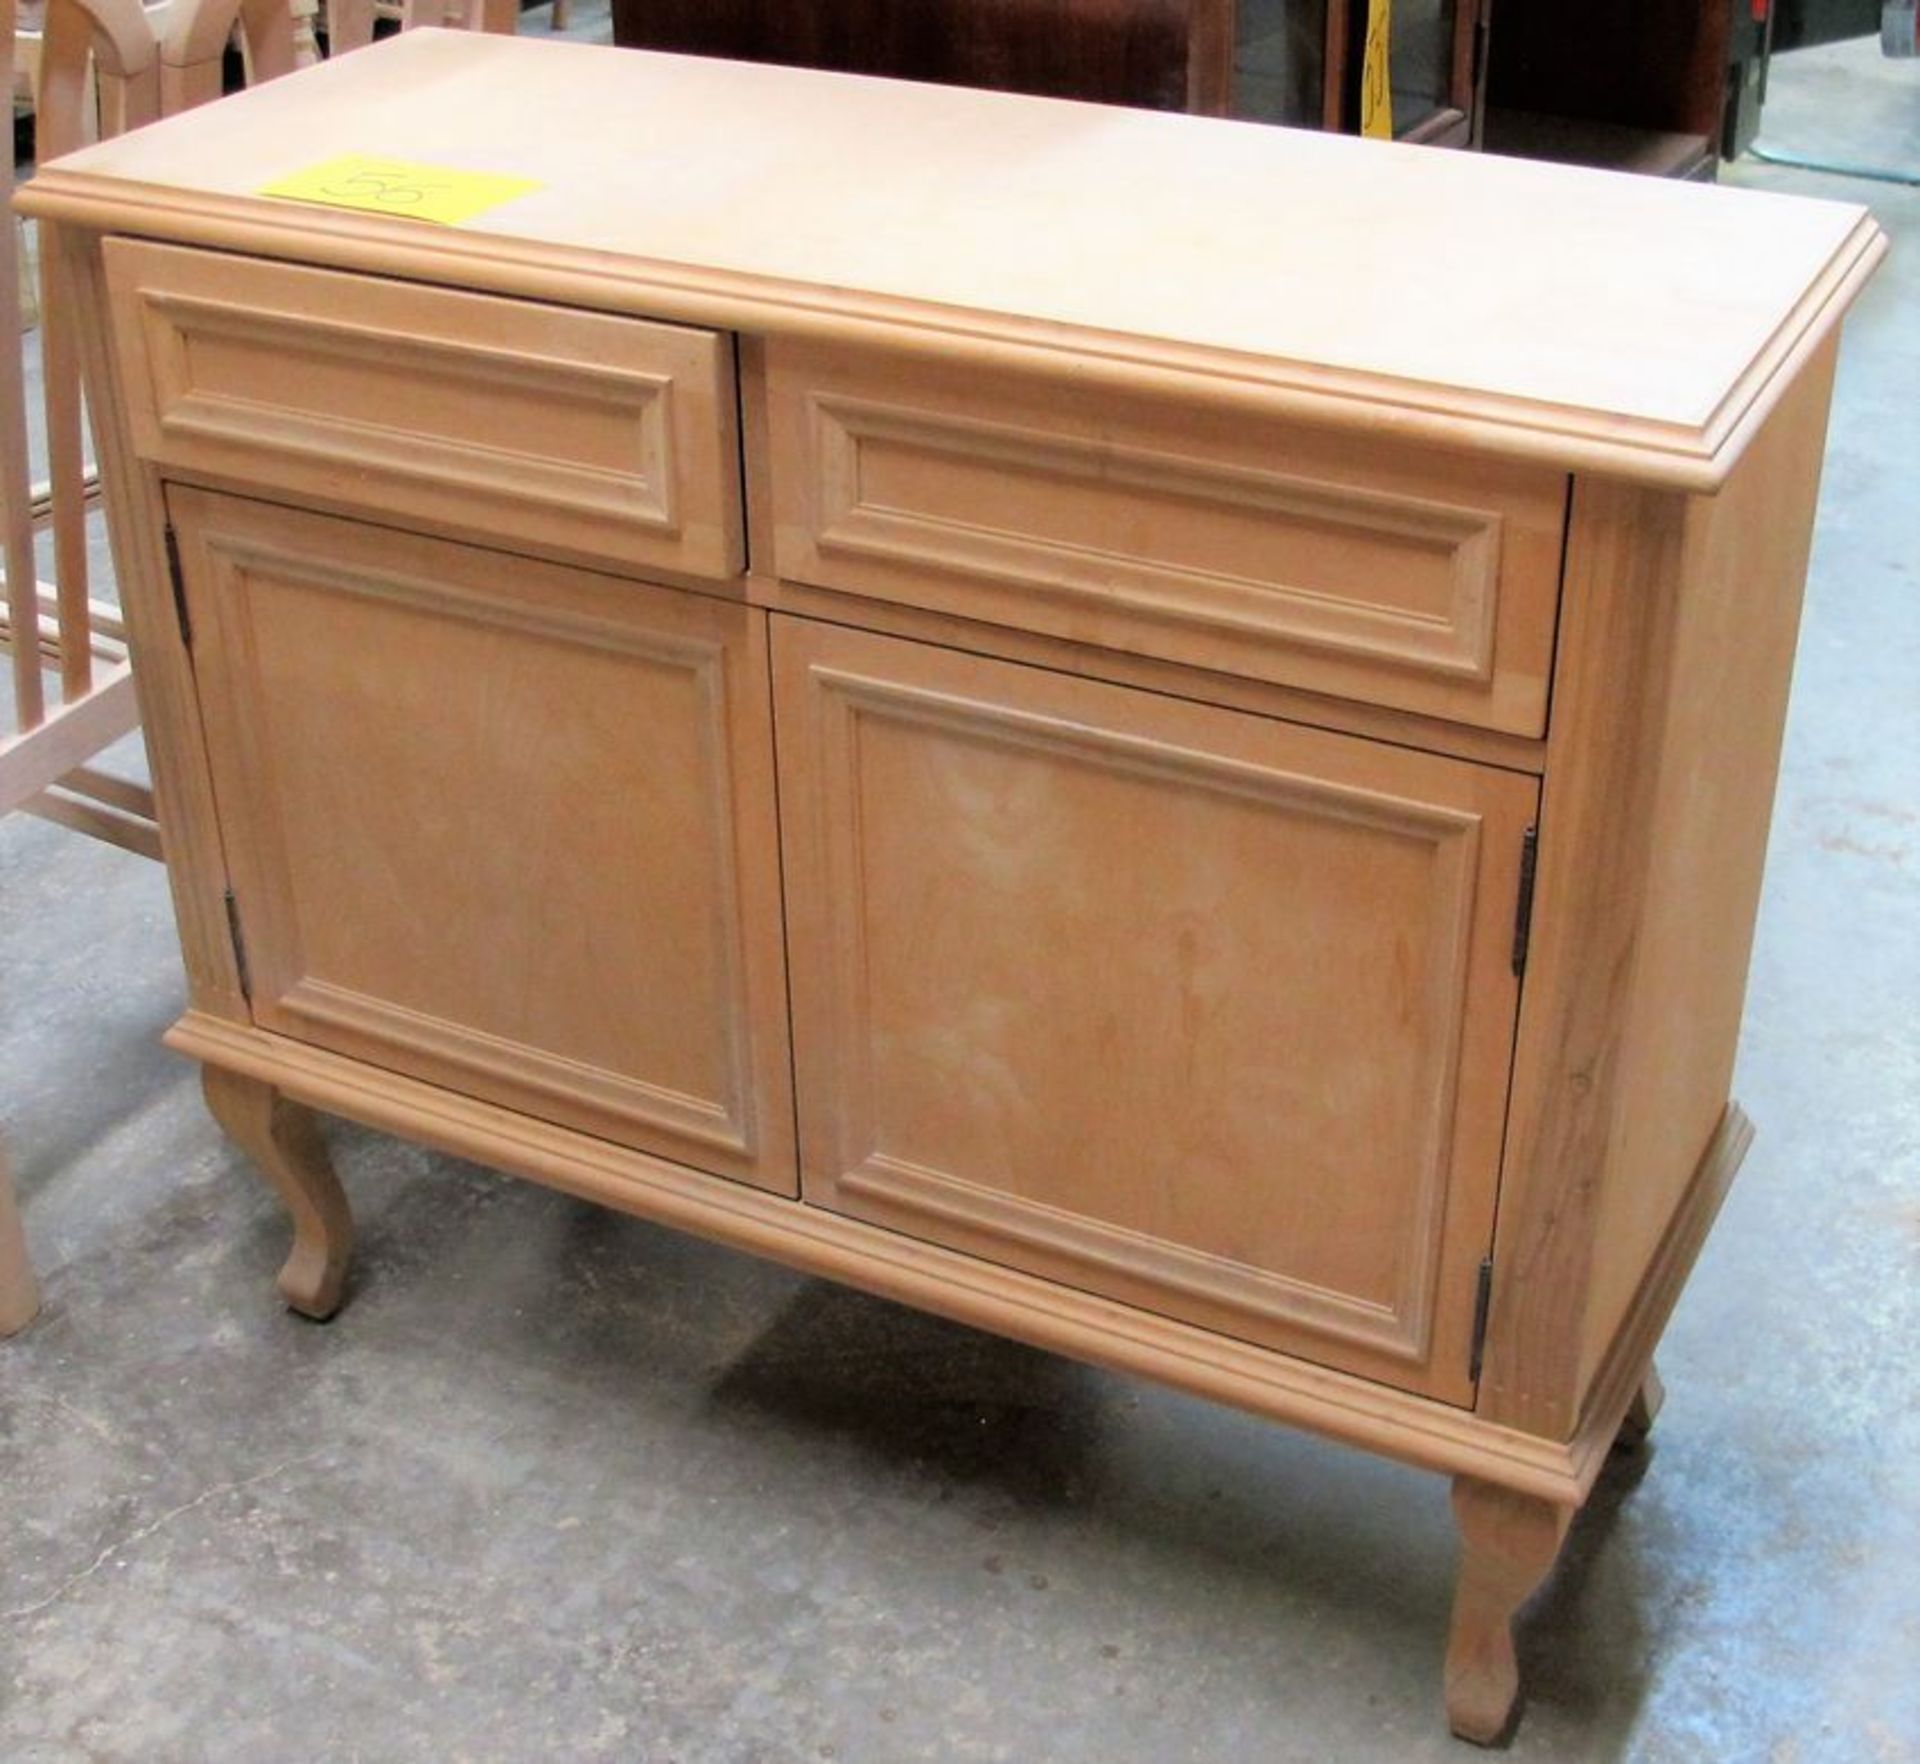 UNFINISHED WOODEN CABINET